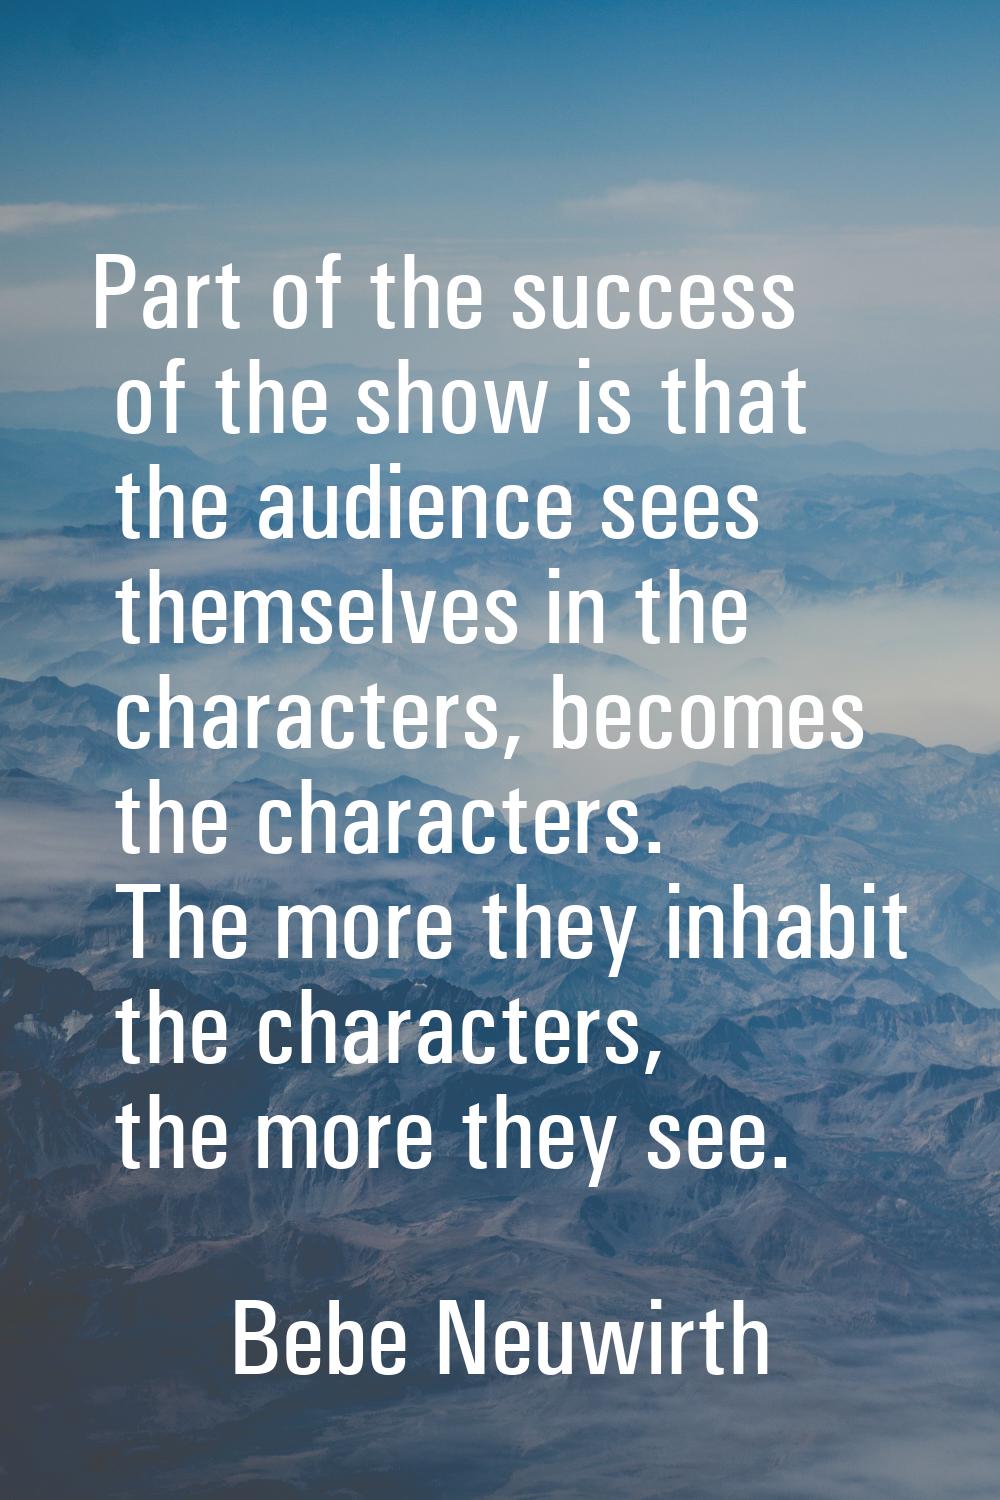 Part of the success of the show is that the audience sees themselves in the characters, becomes the